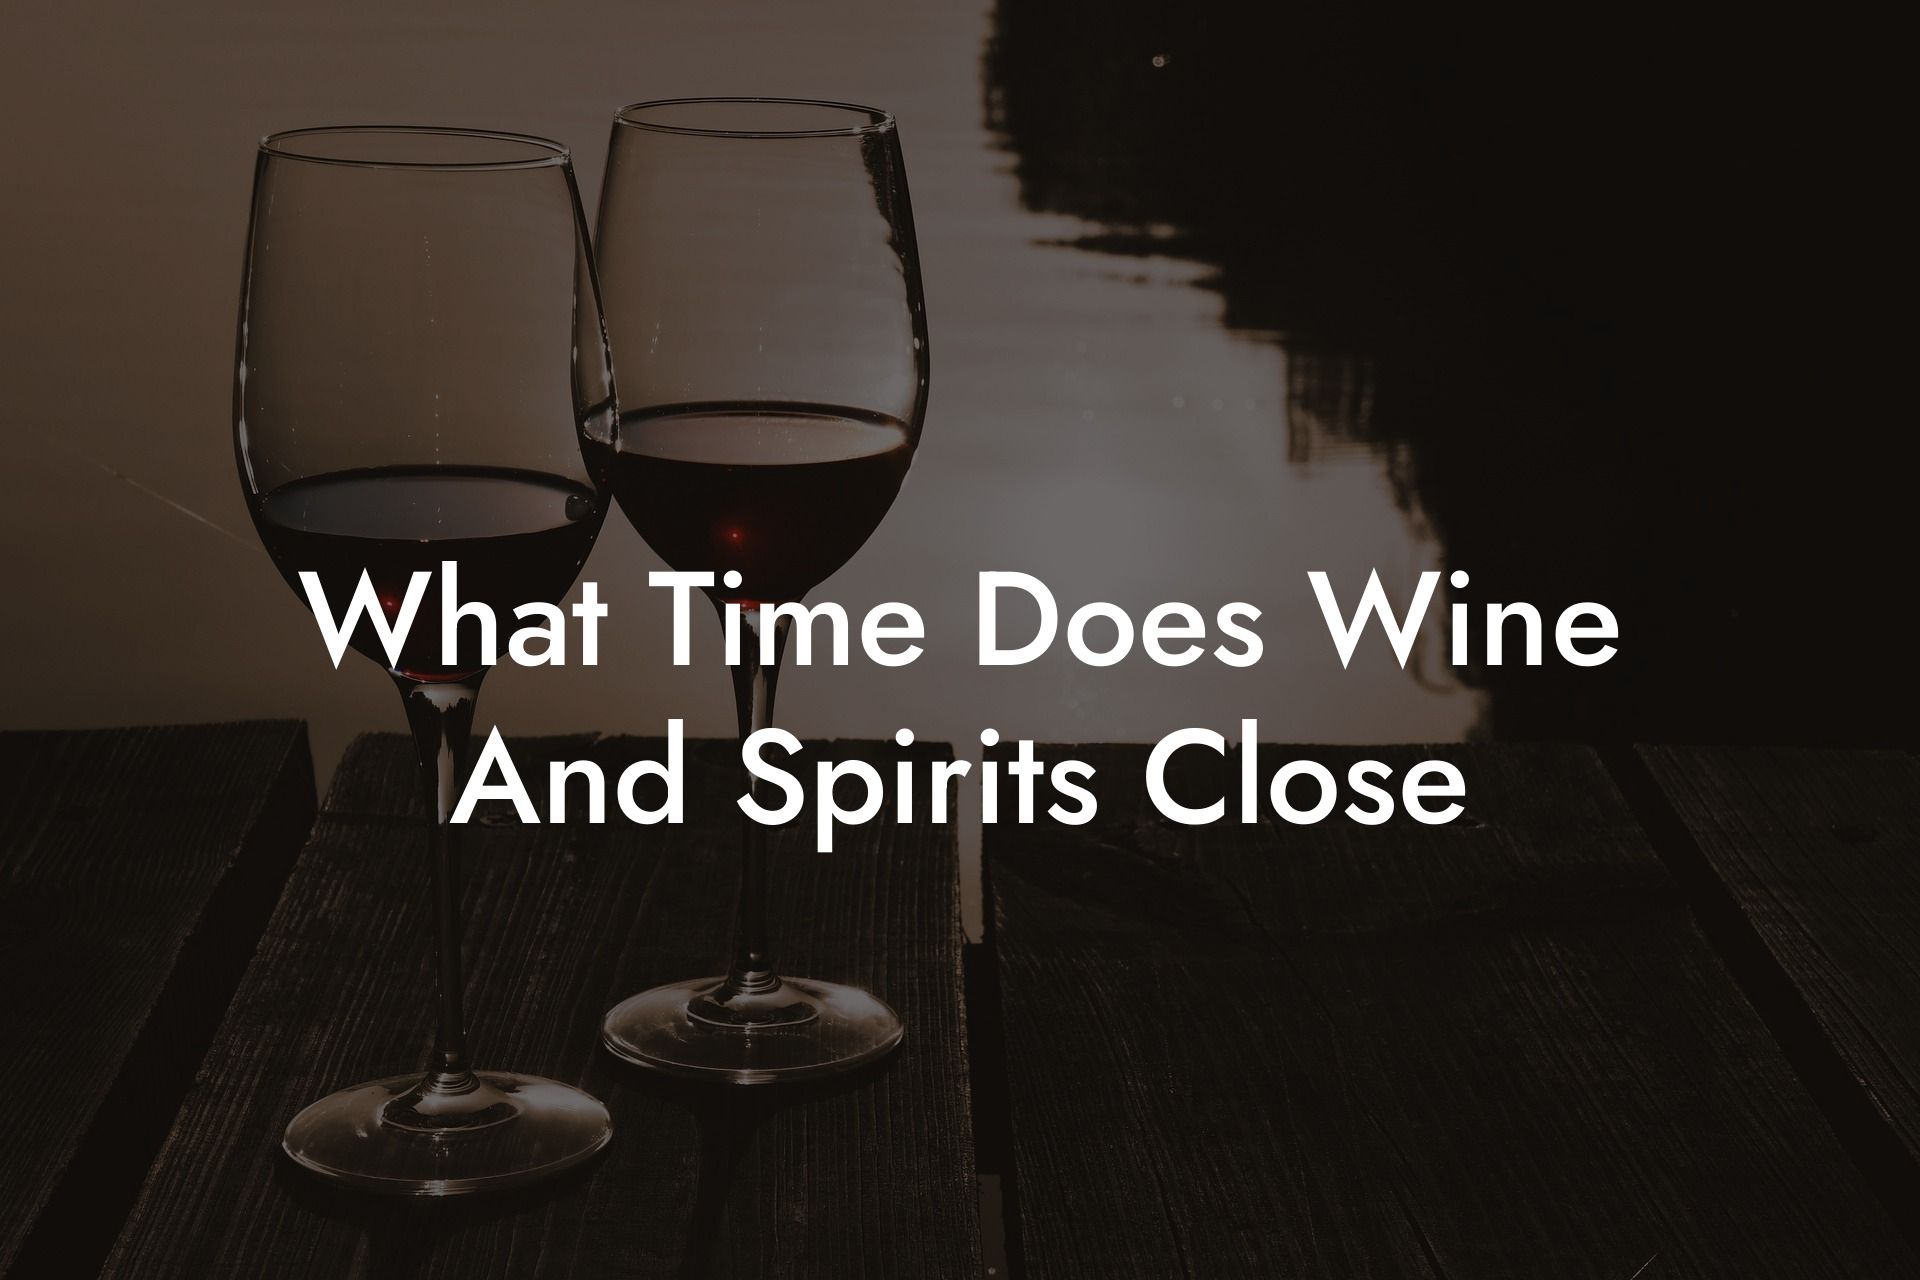 What Time Does Wine And Spirits Close